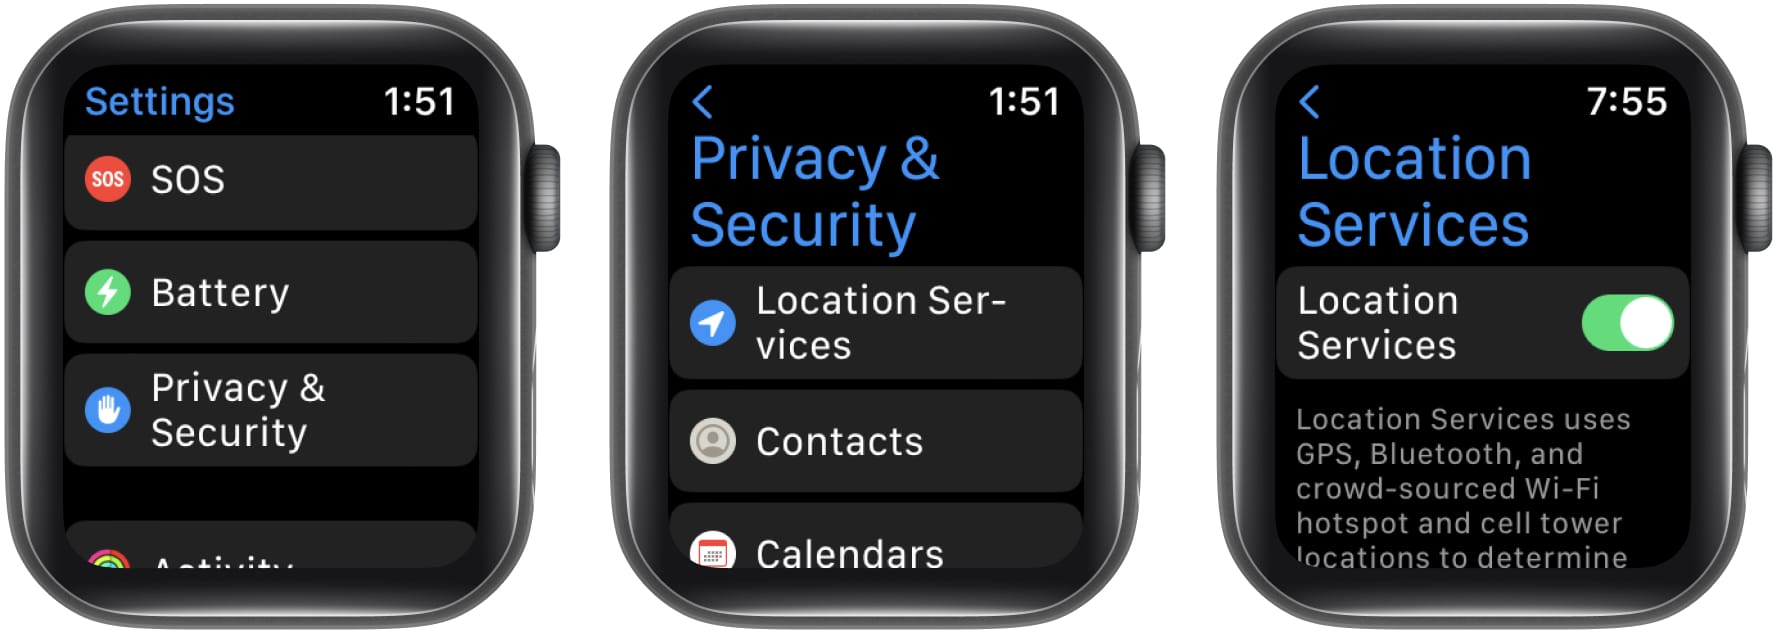 Enable Location Services toggle on Apple Watch